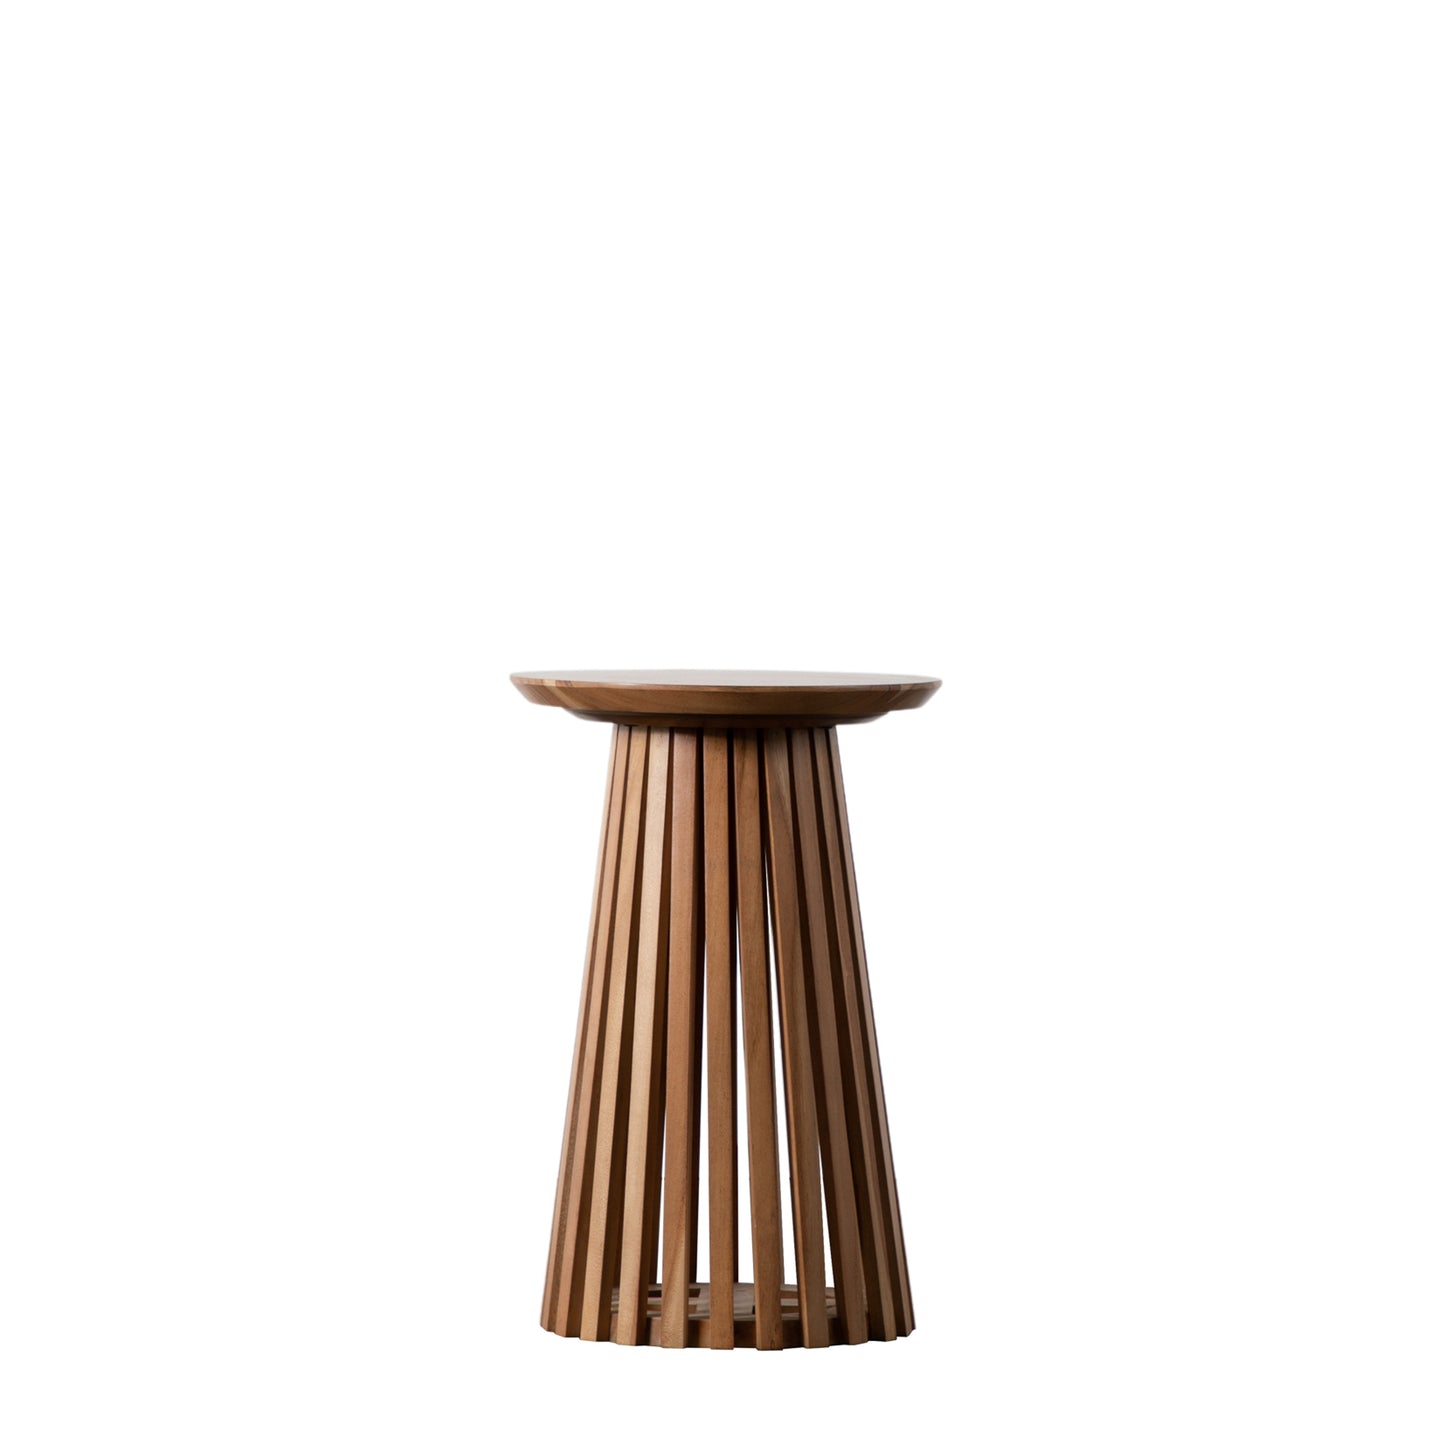 A stylish Ditsum Slatted Side Table 400x400x600mm by Kikiathome.co.uk for interior decor.